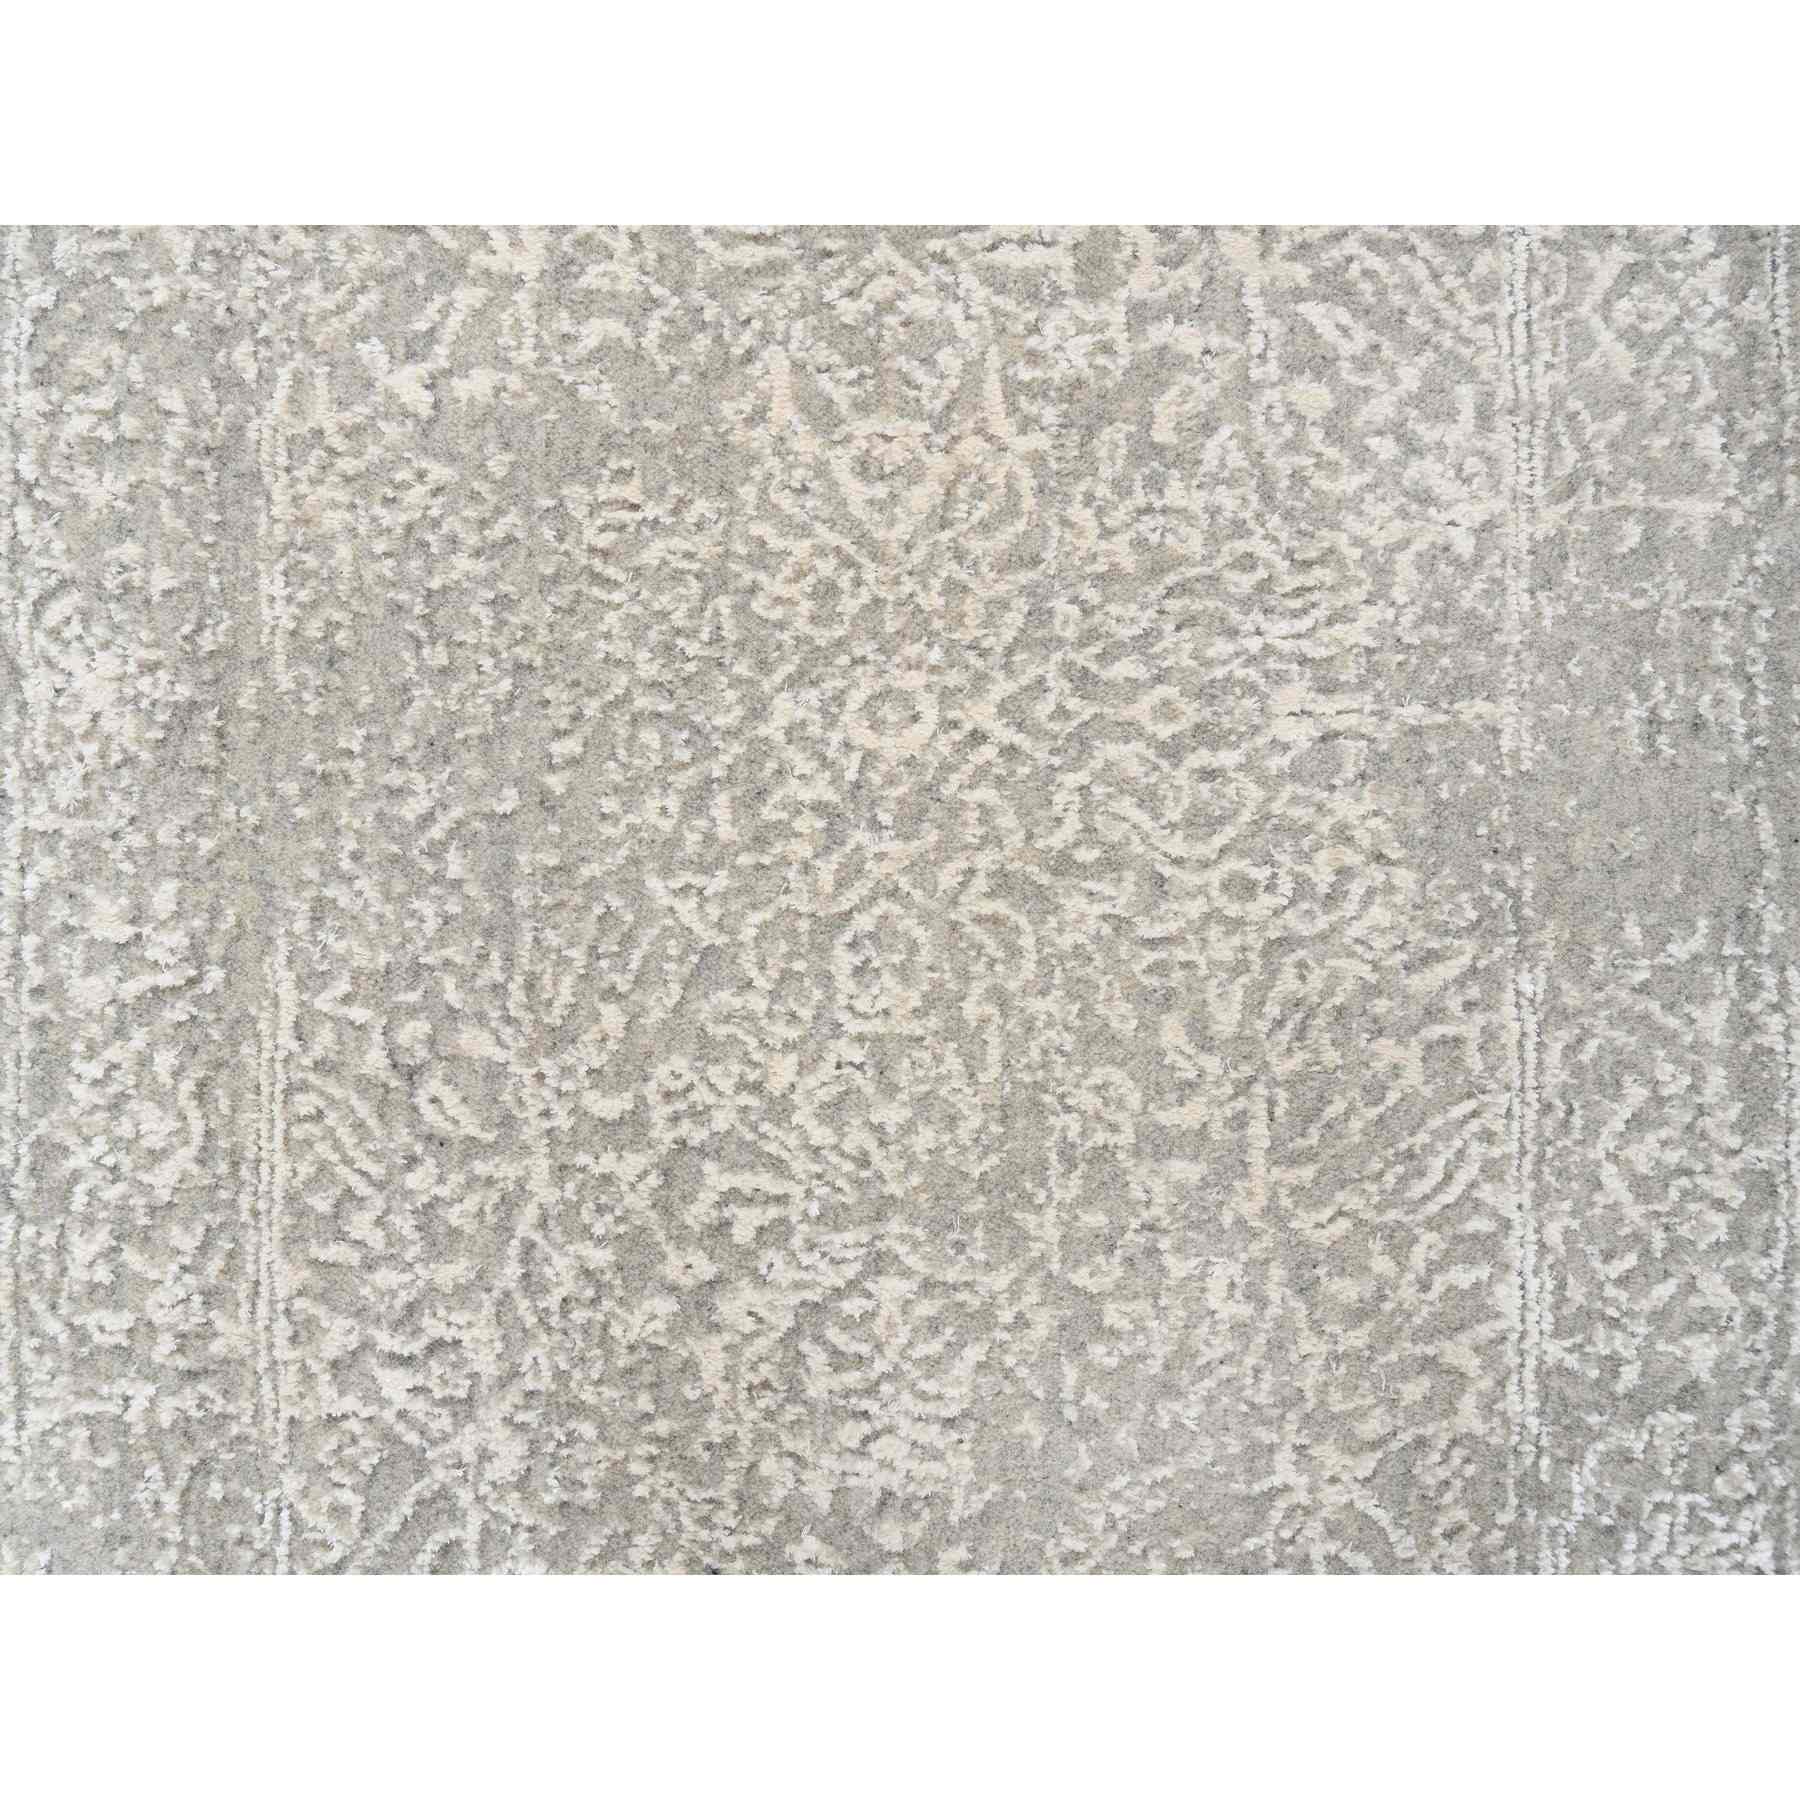 Modern-and-Contemporary-Hand-Loomed-Rug-316415